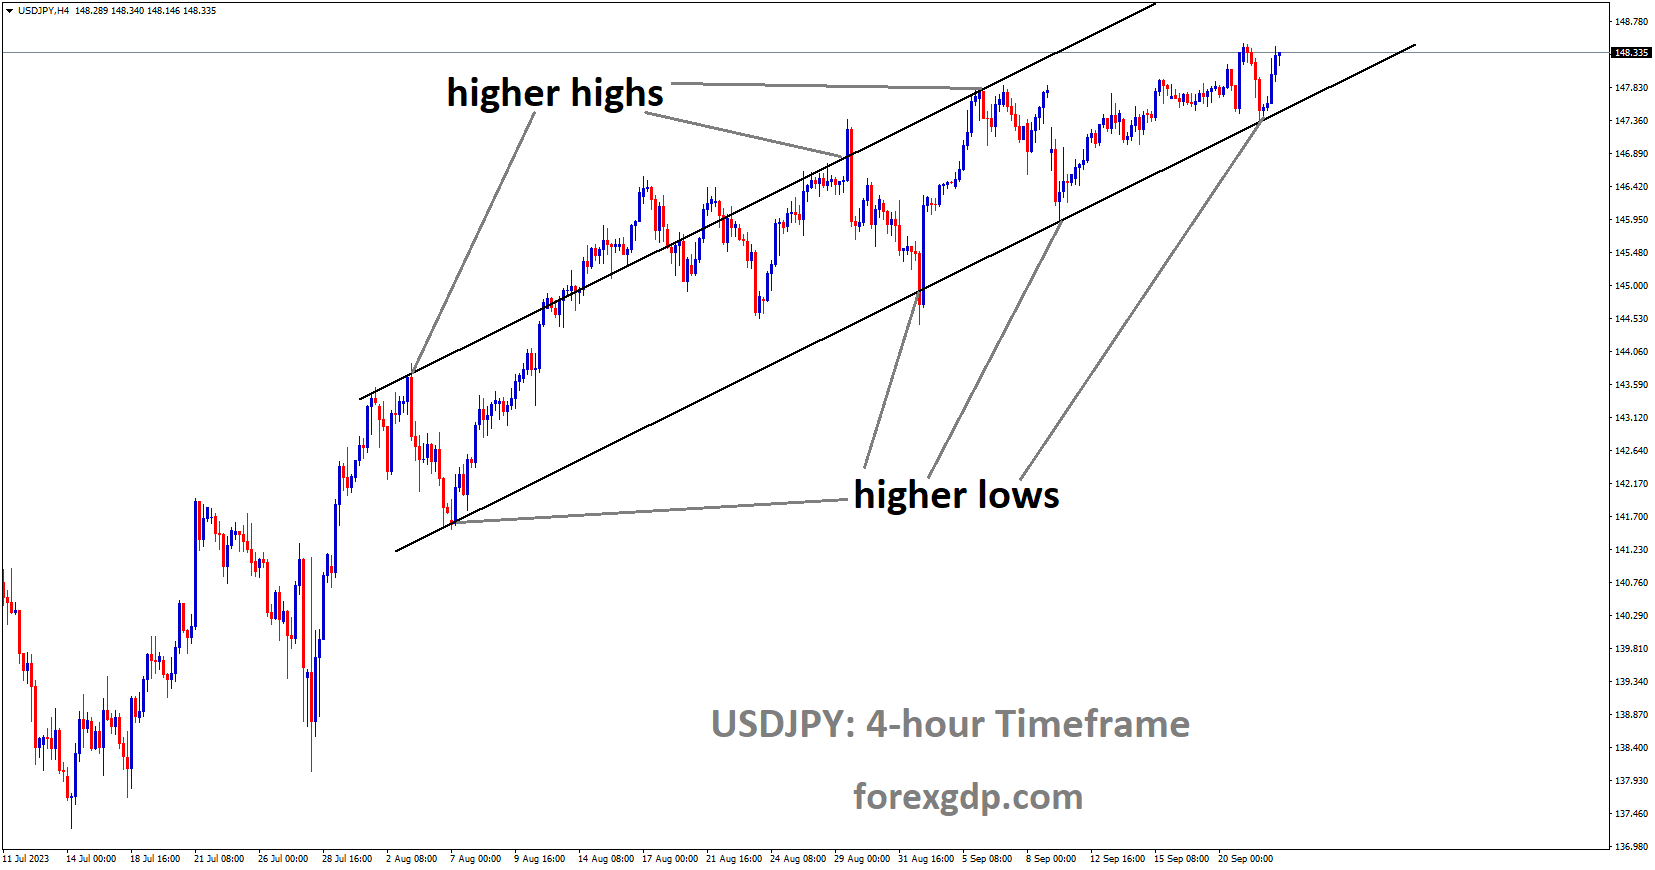 USDJPY is moving in Ascending channel and market has rebounded from the higher low area of the channel